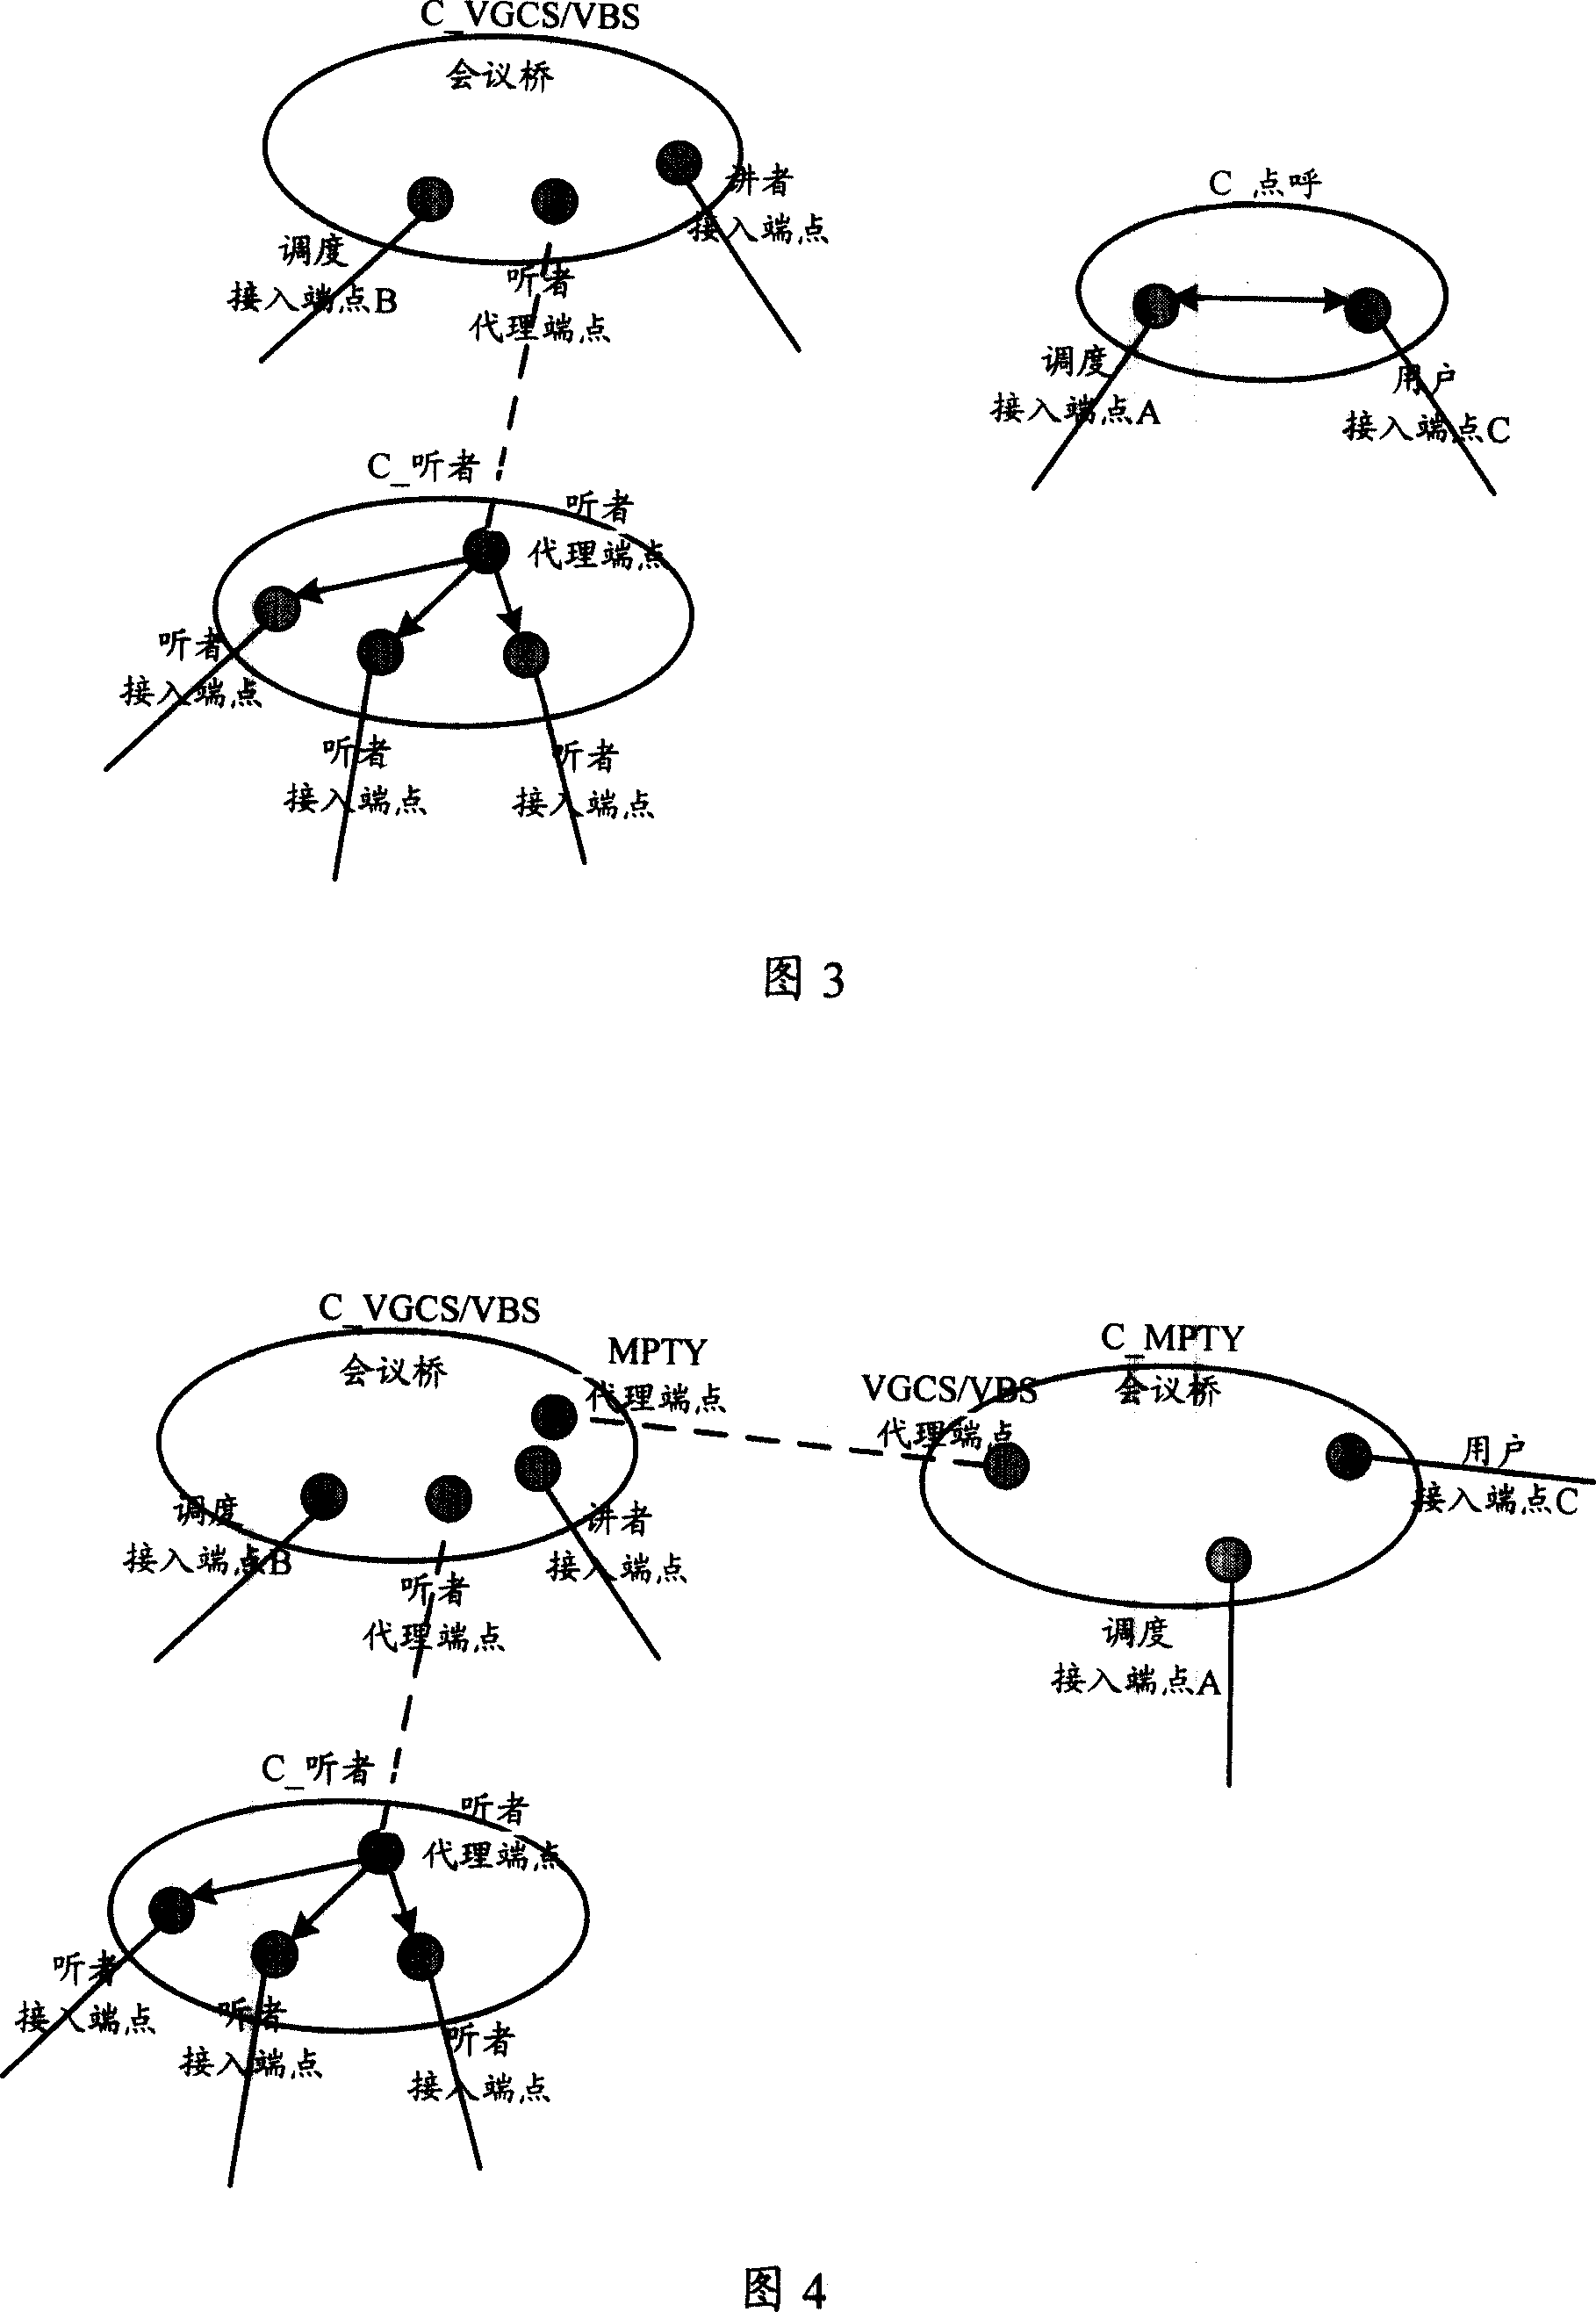 Scheduling method and system of the multi-party call service